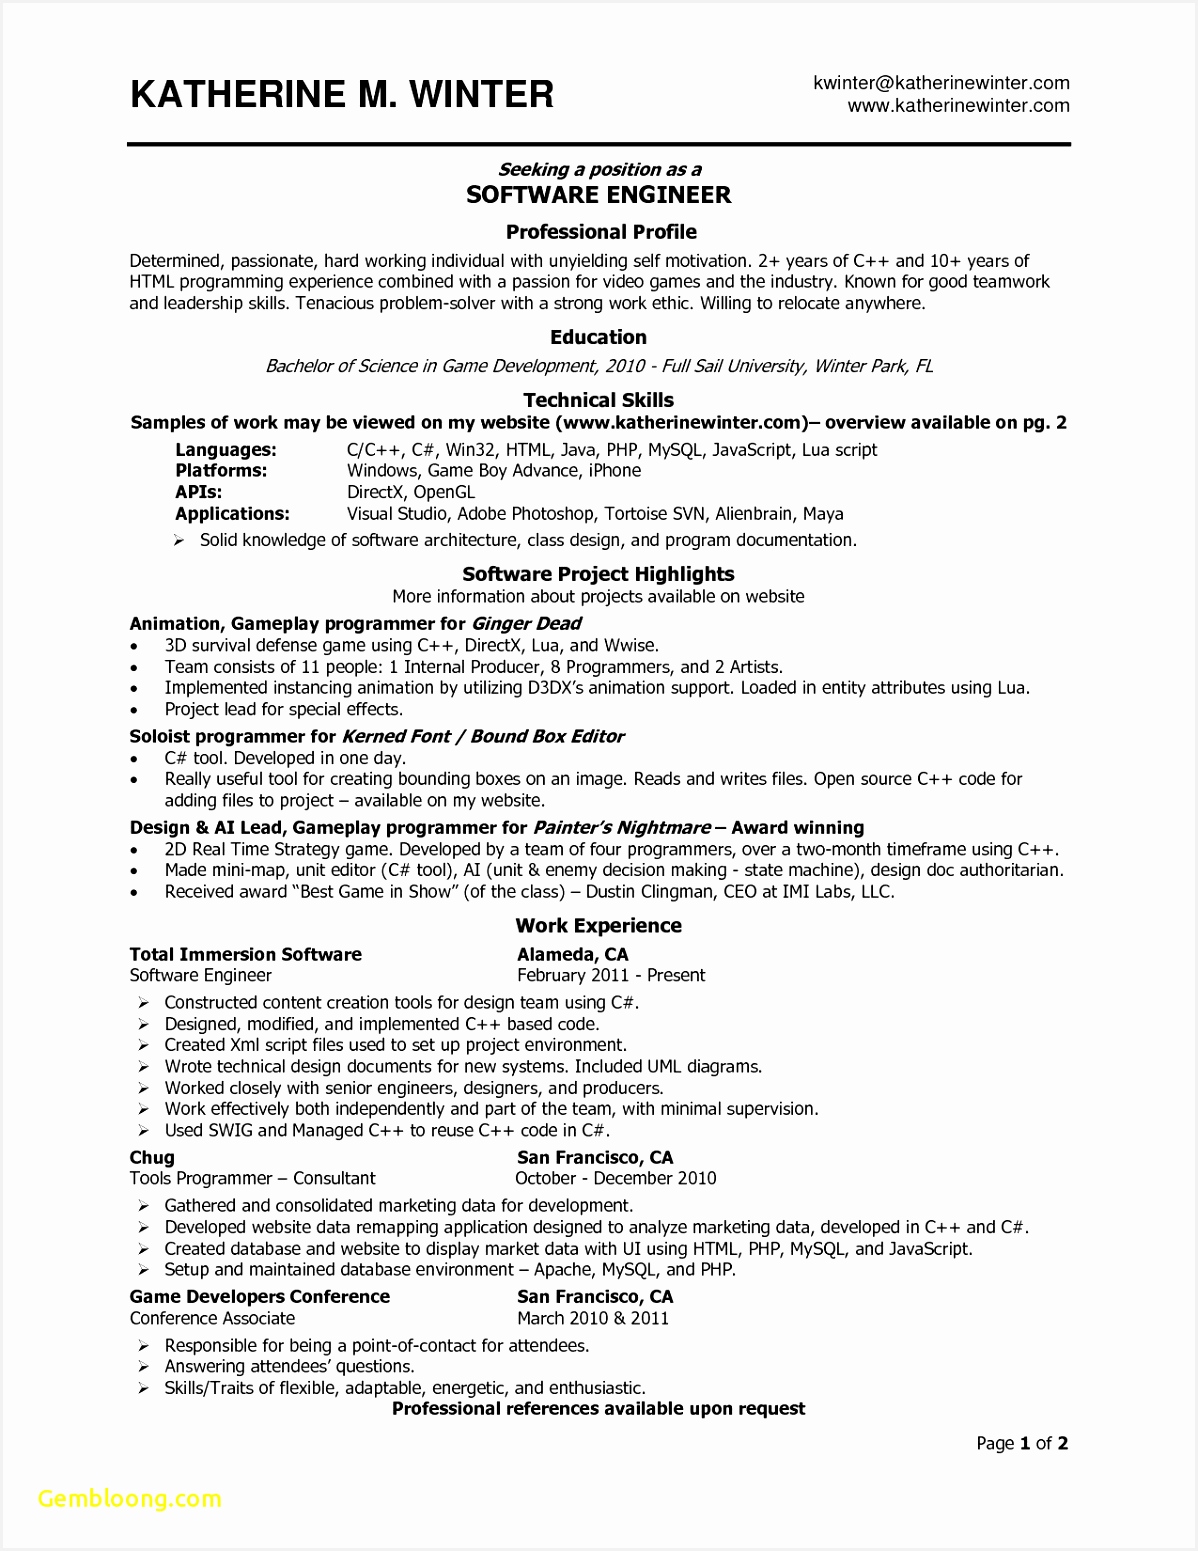 Pr Resume New Fresh Pr Resume Template Elegant Dictionary Template 0d Archives Download Awesome Pr Resume from software engineer resume templates 15511198dIlhn